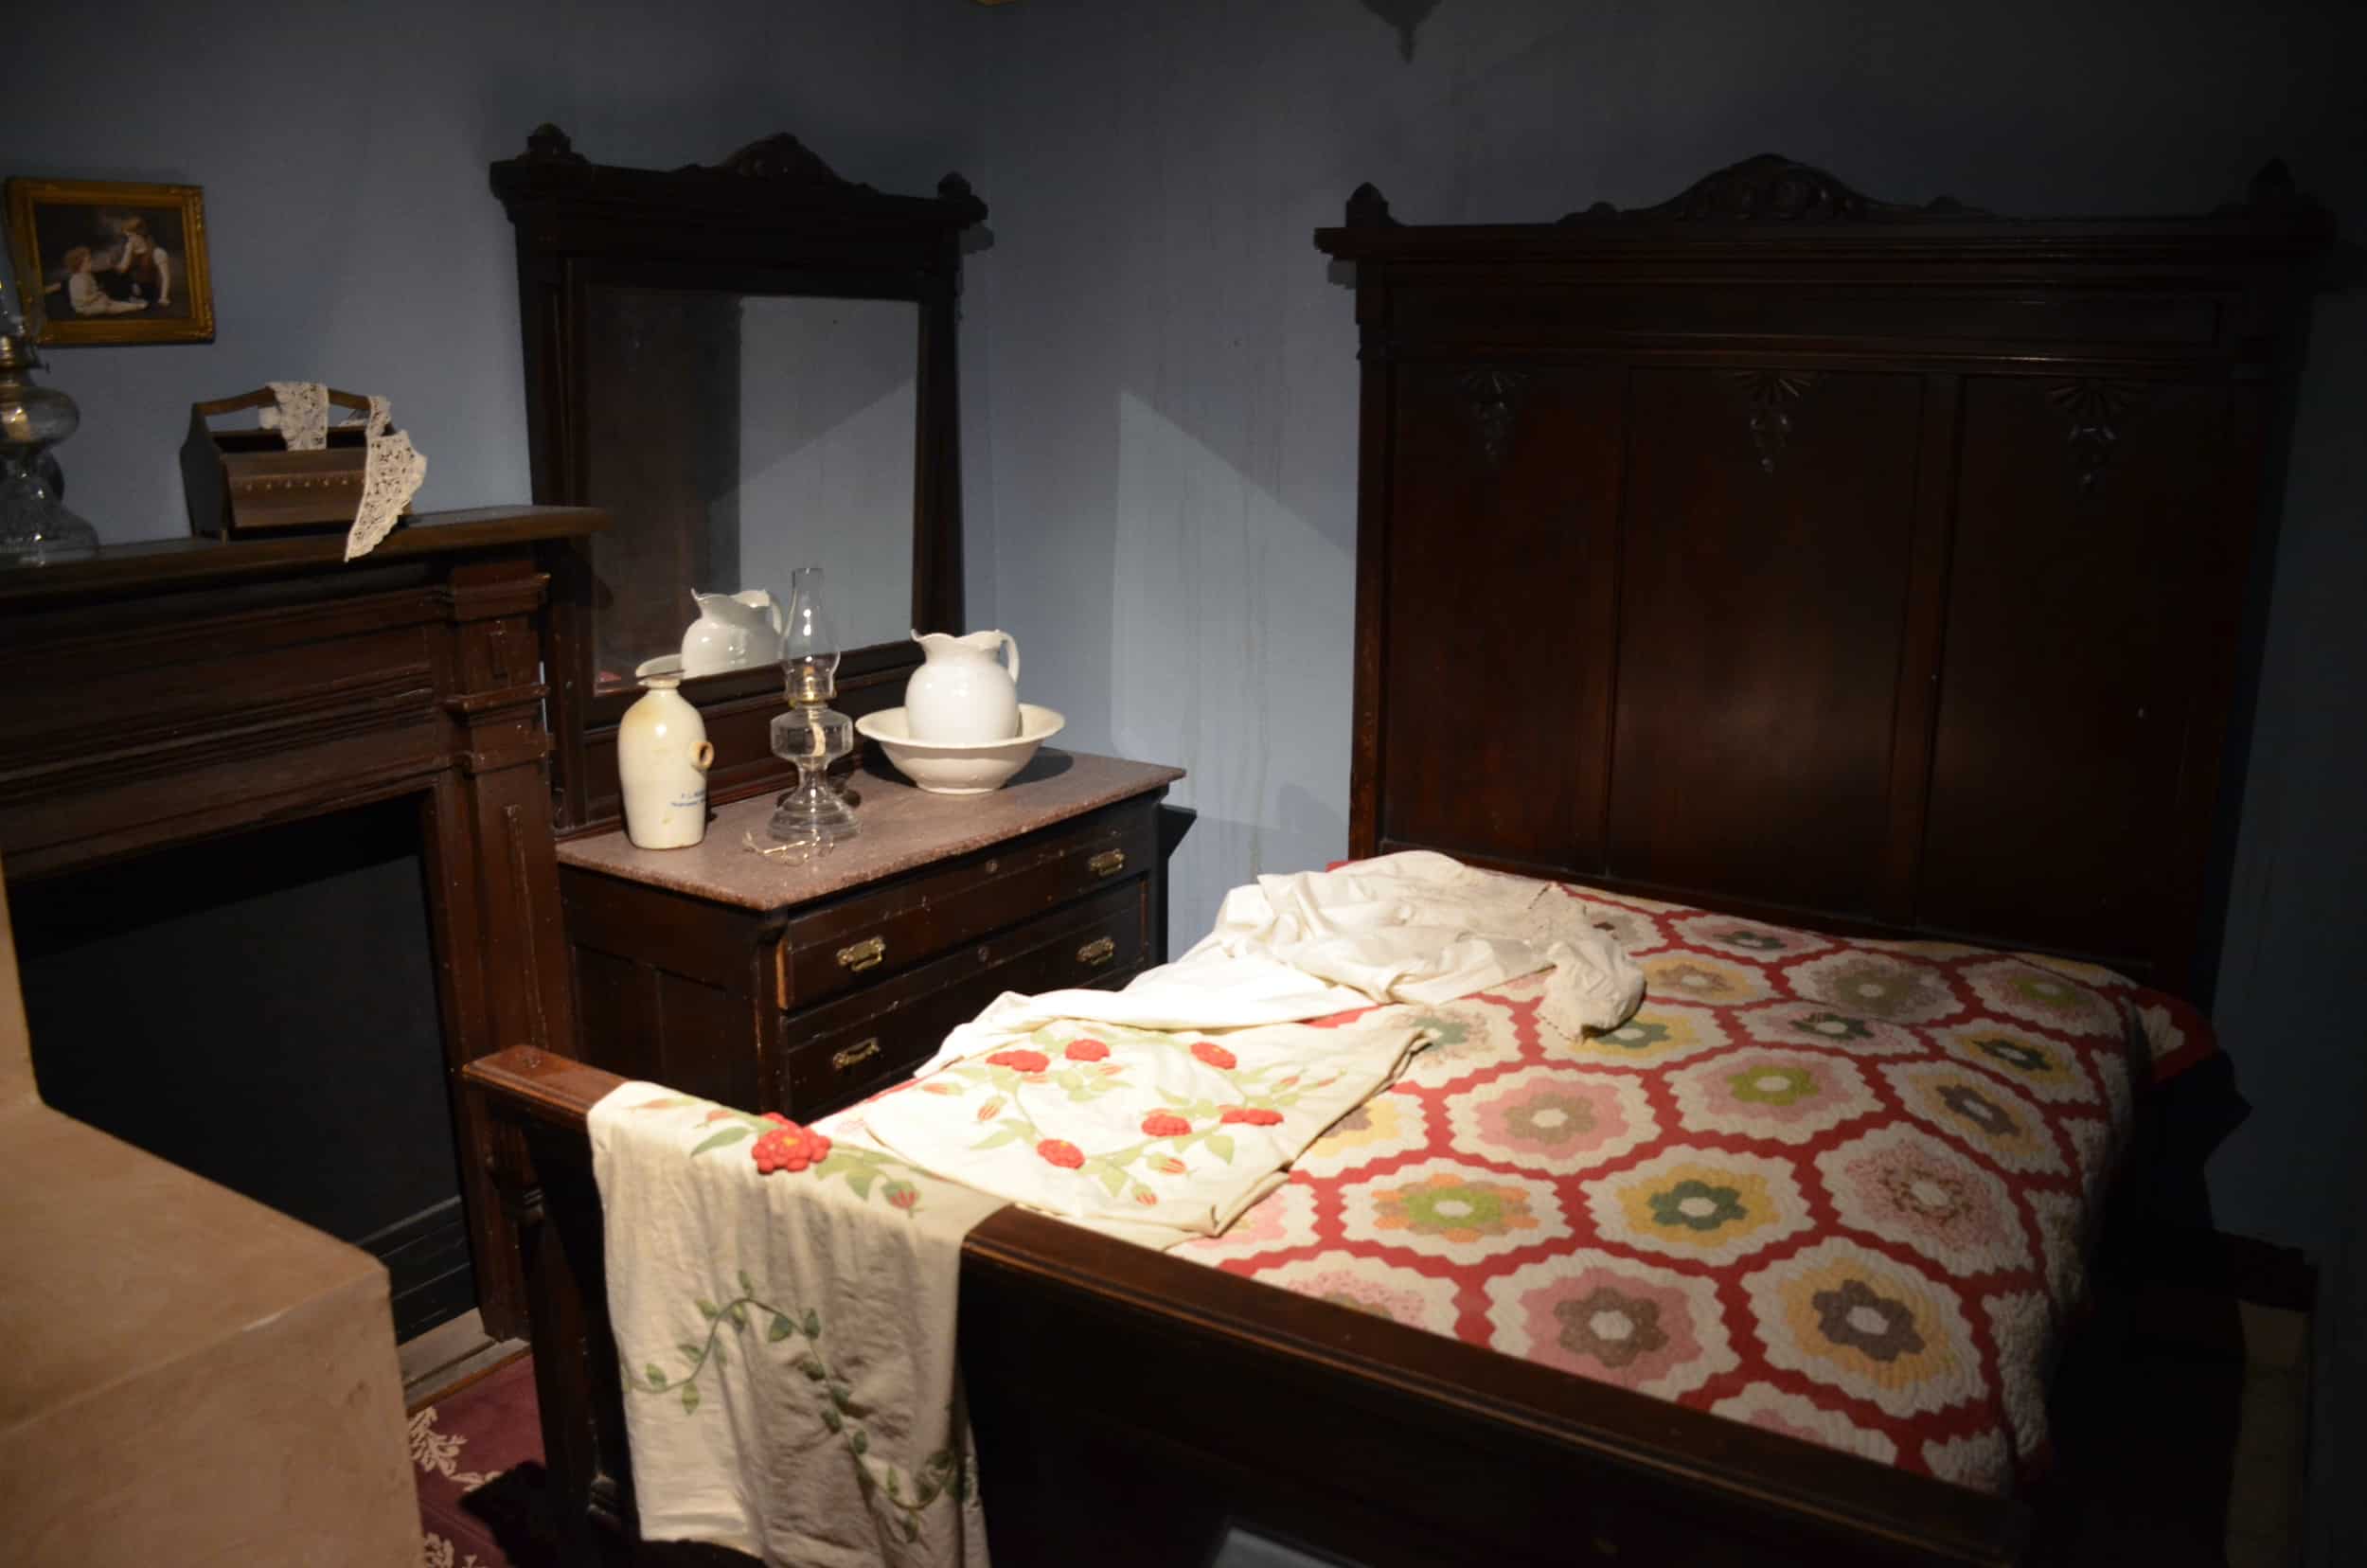 Bedroom at the City of Las Vegas Museum